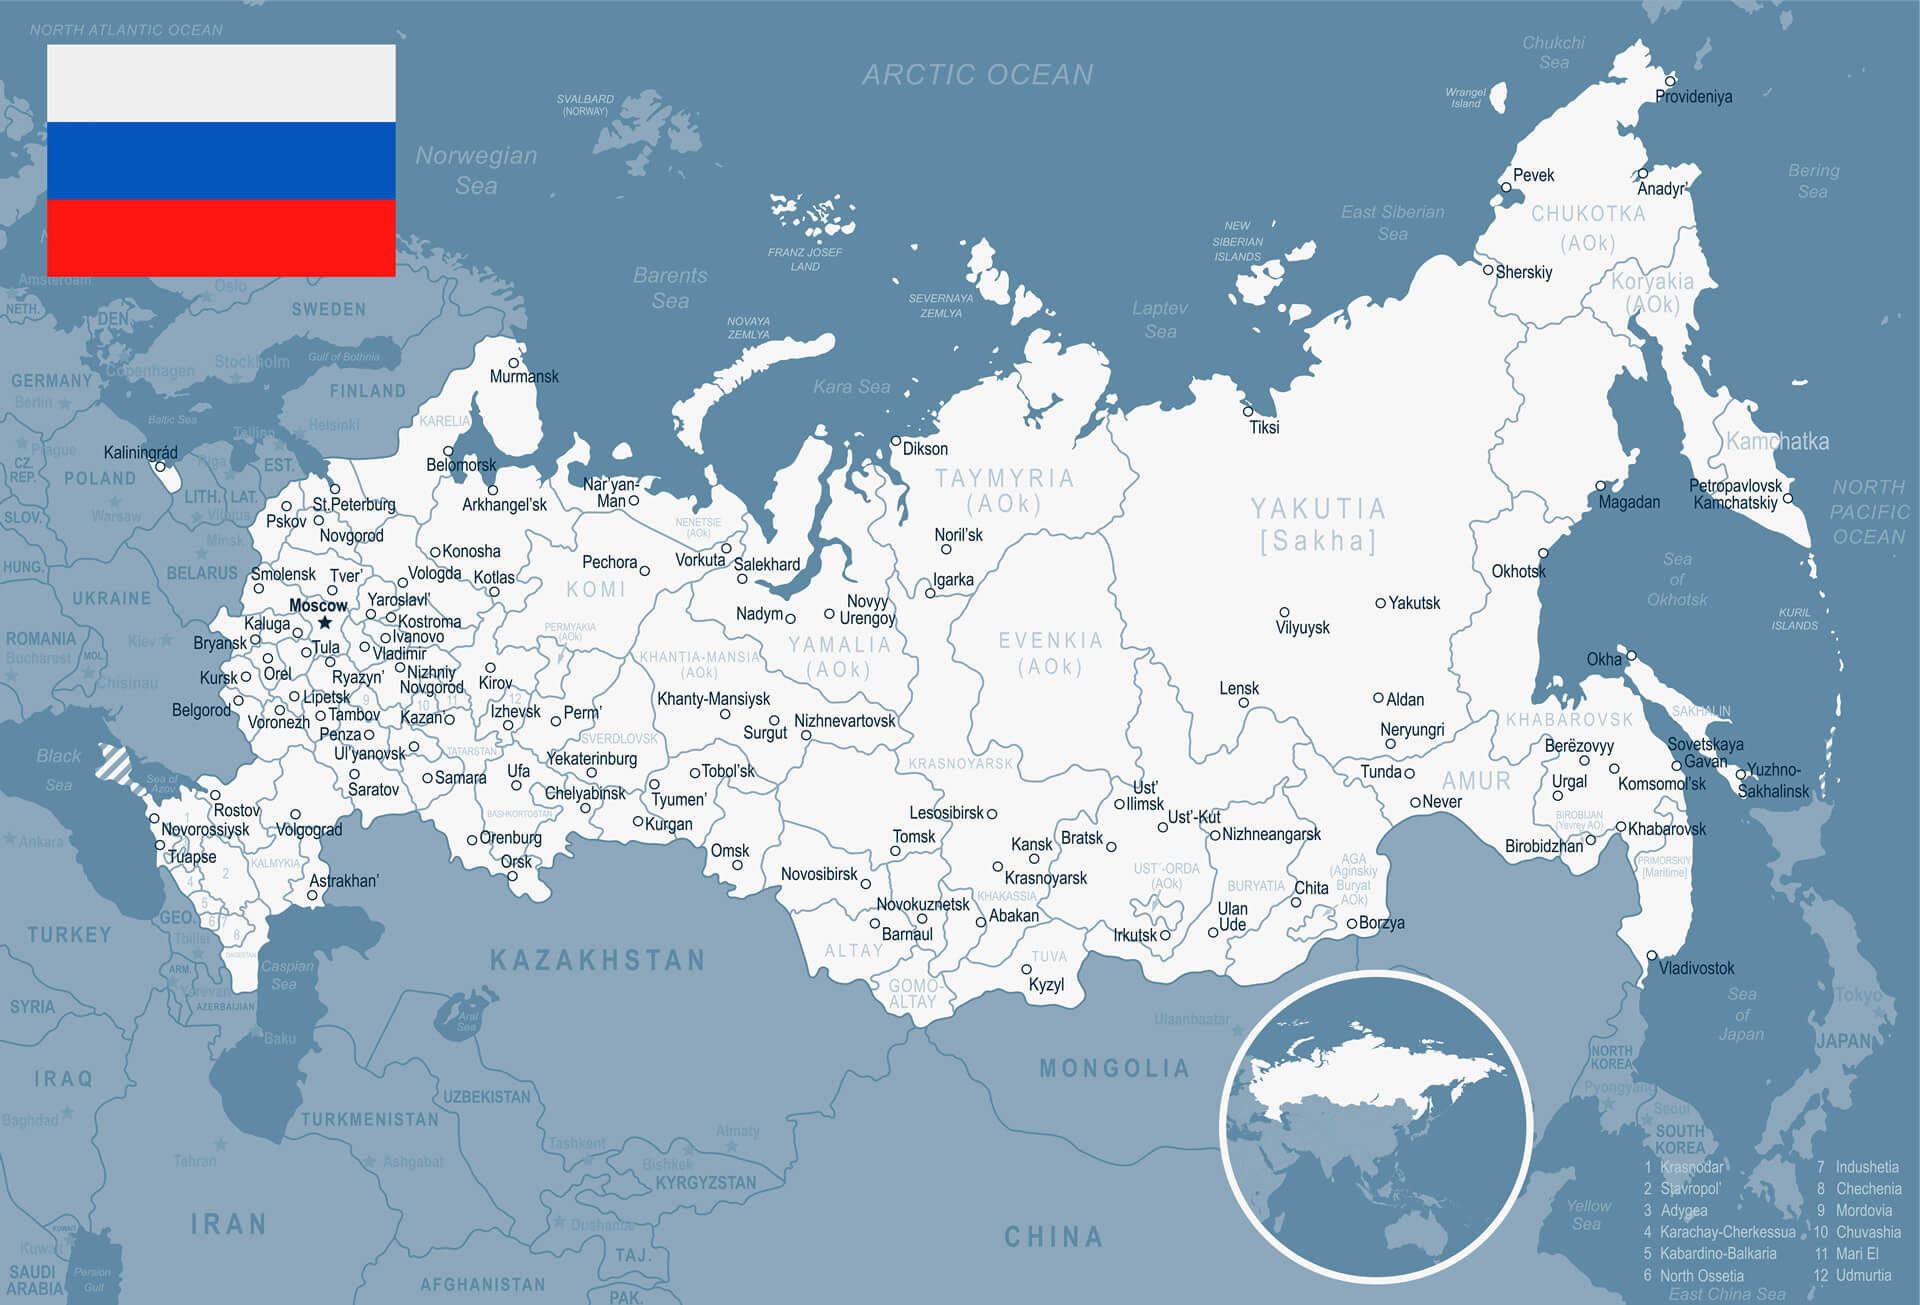 russia map with cities and states